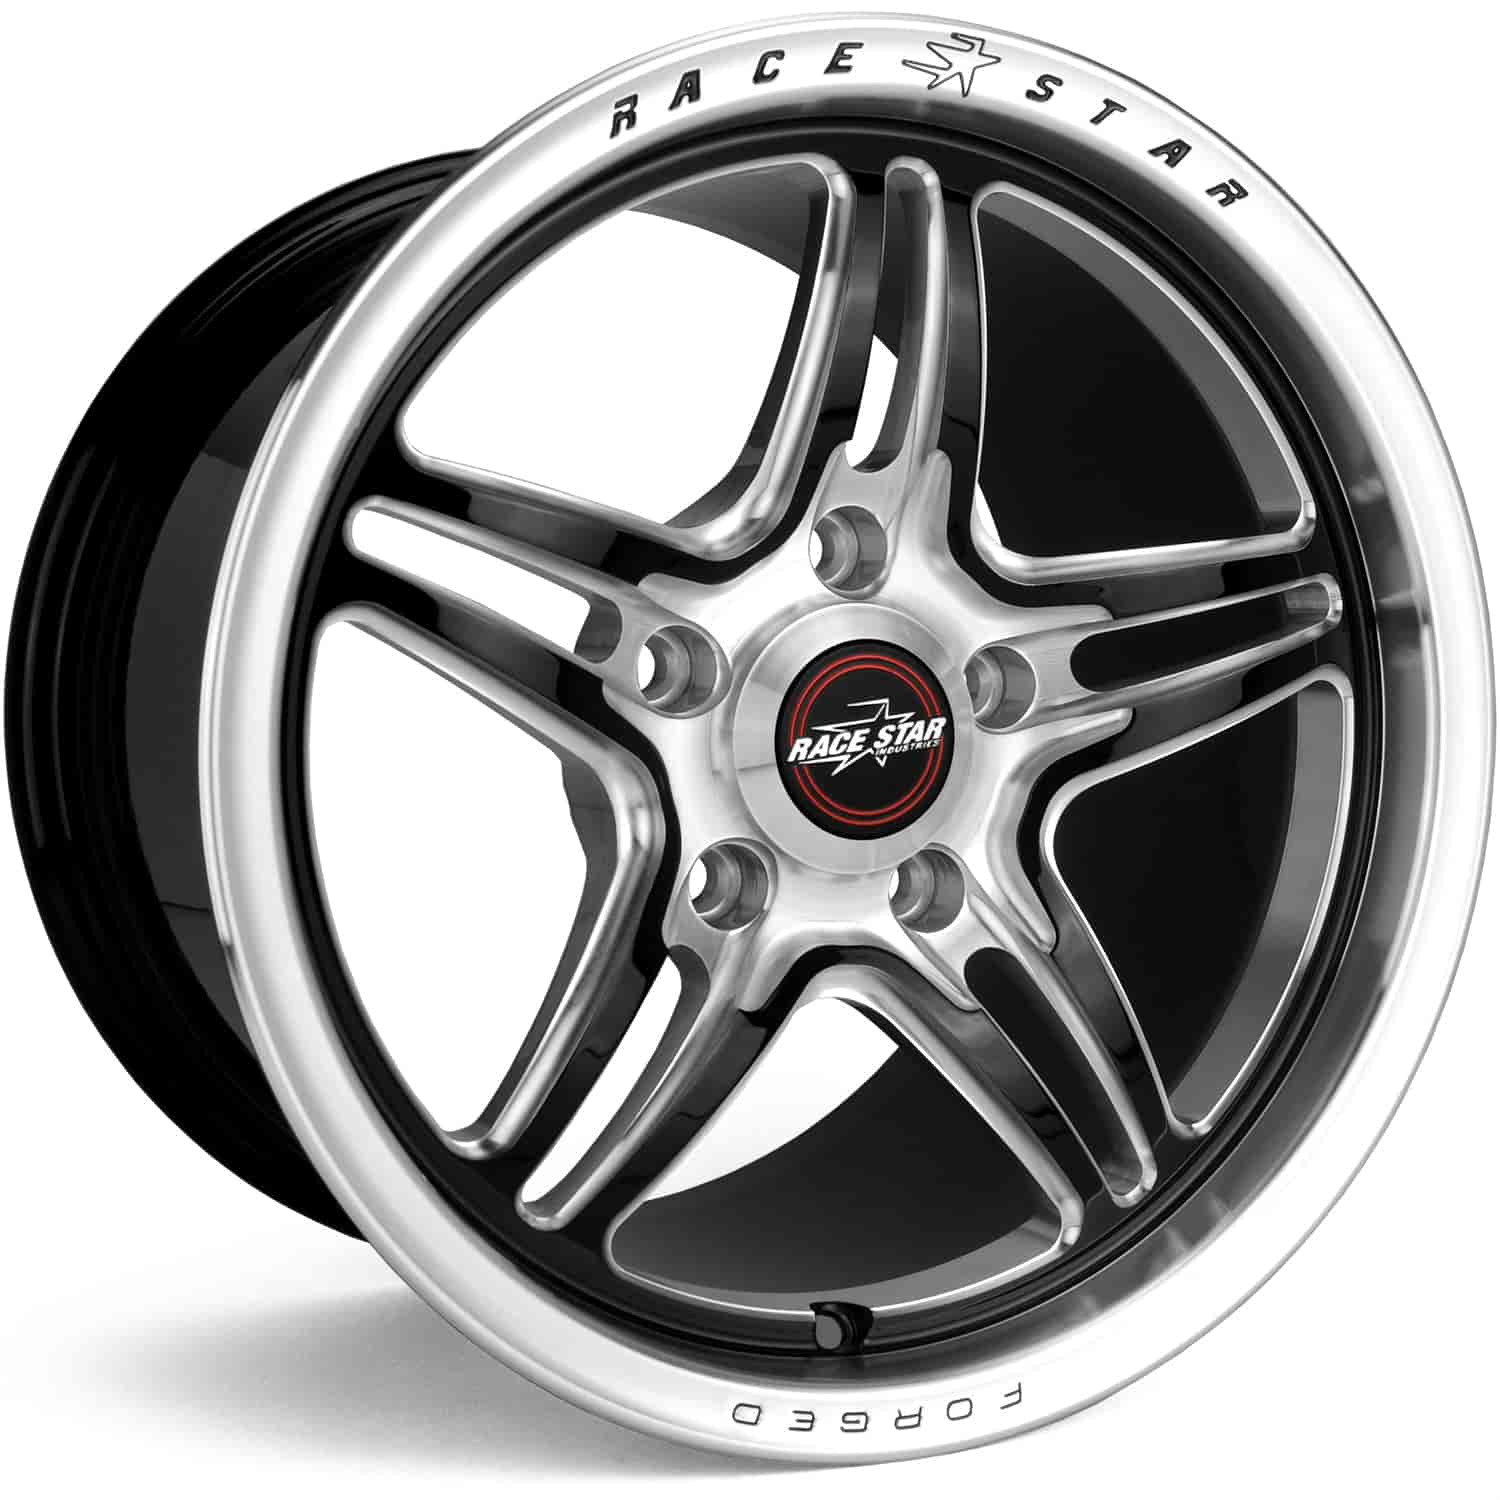 RSF-1 Forged Wheel Size: 17" x 10.5"